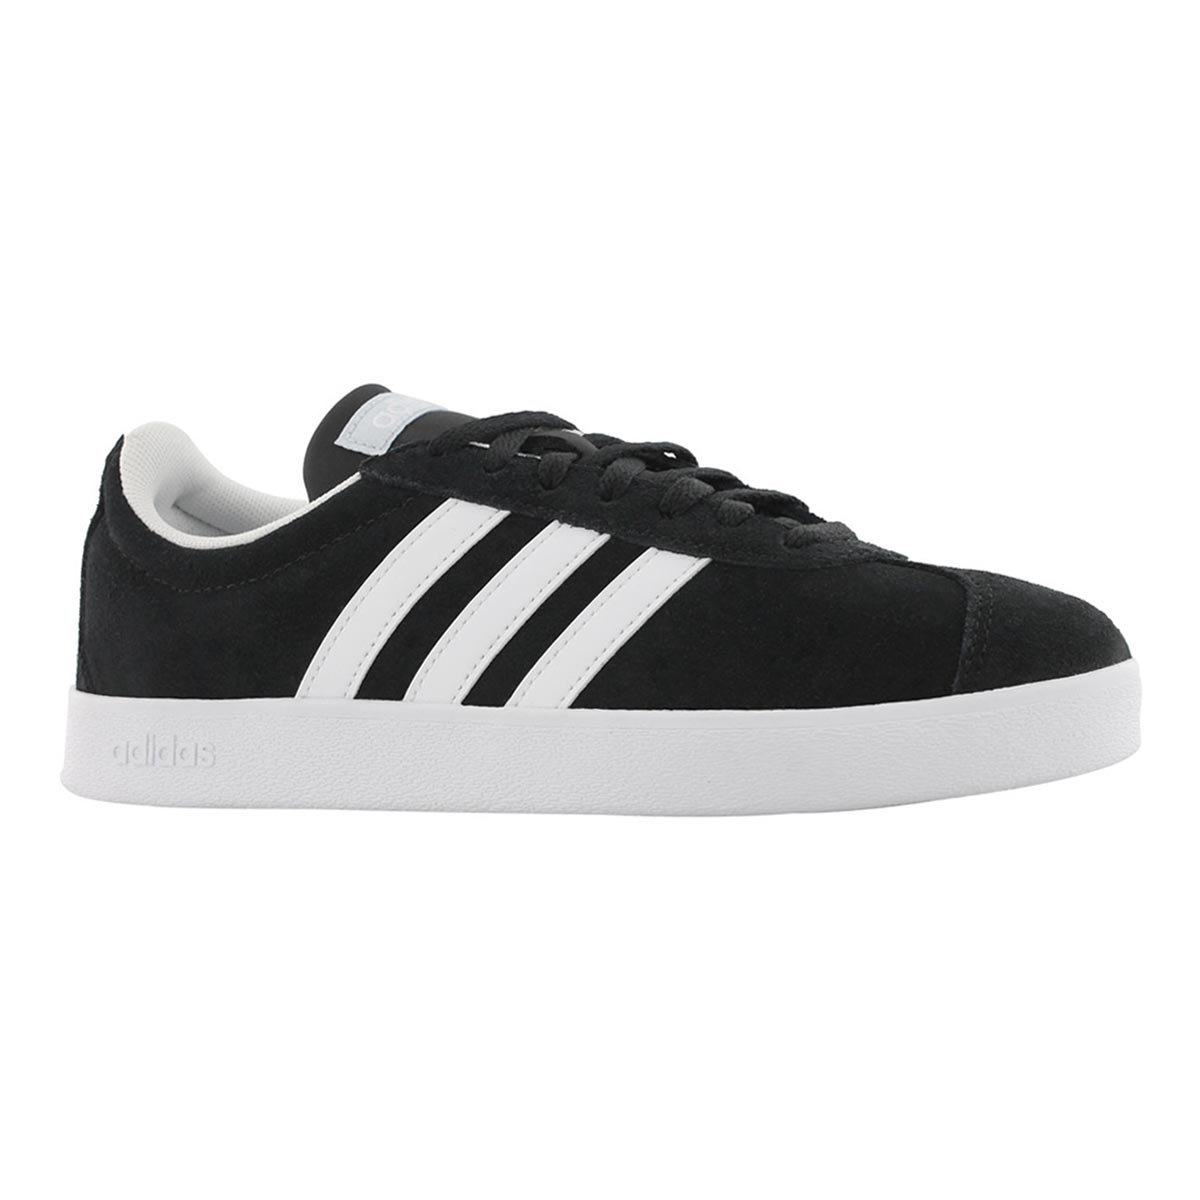 adidas women's black and white sneakers